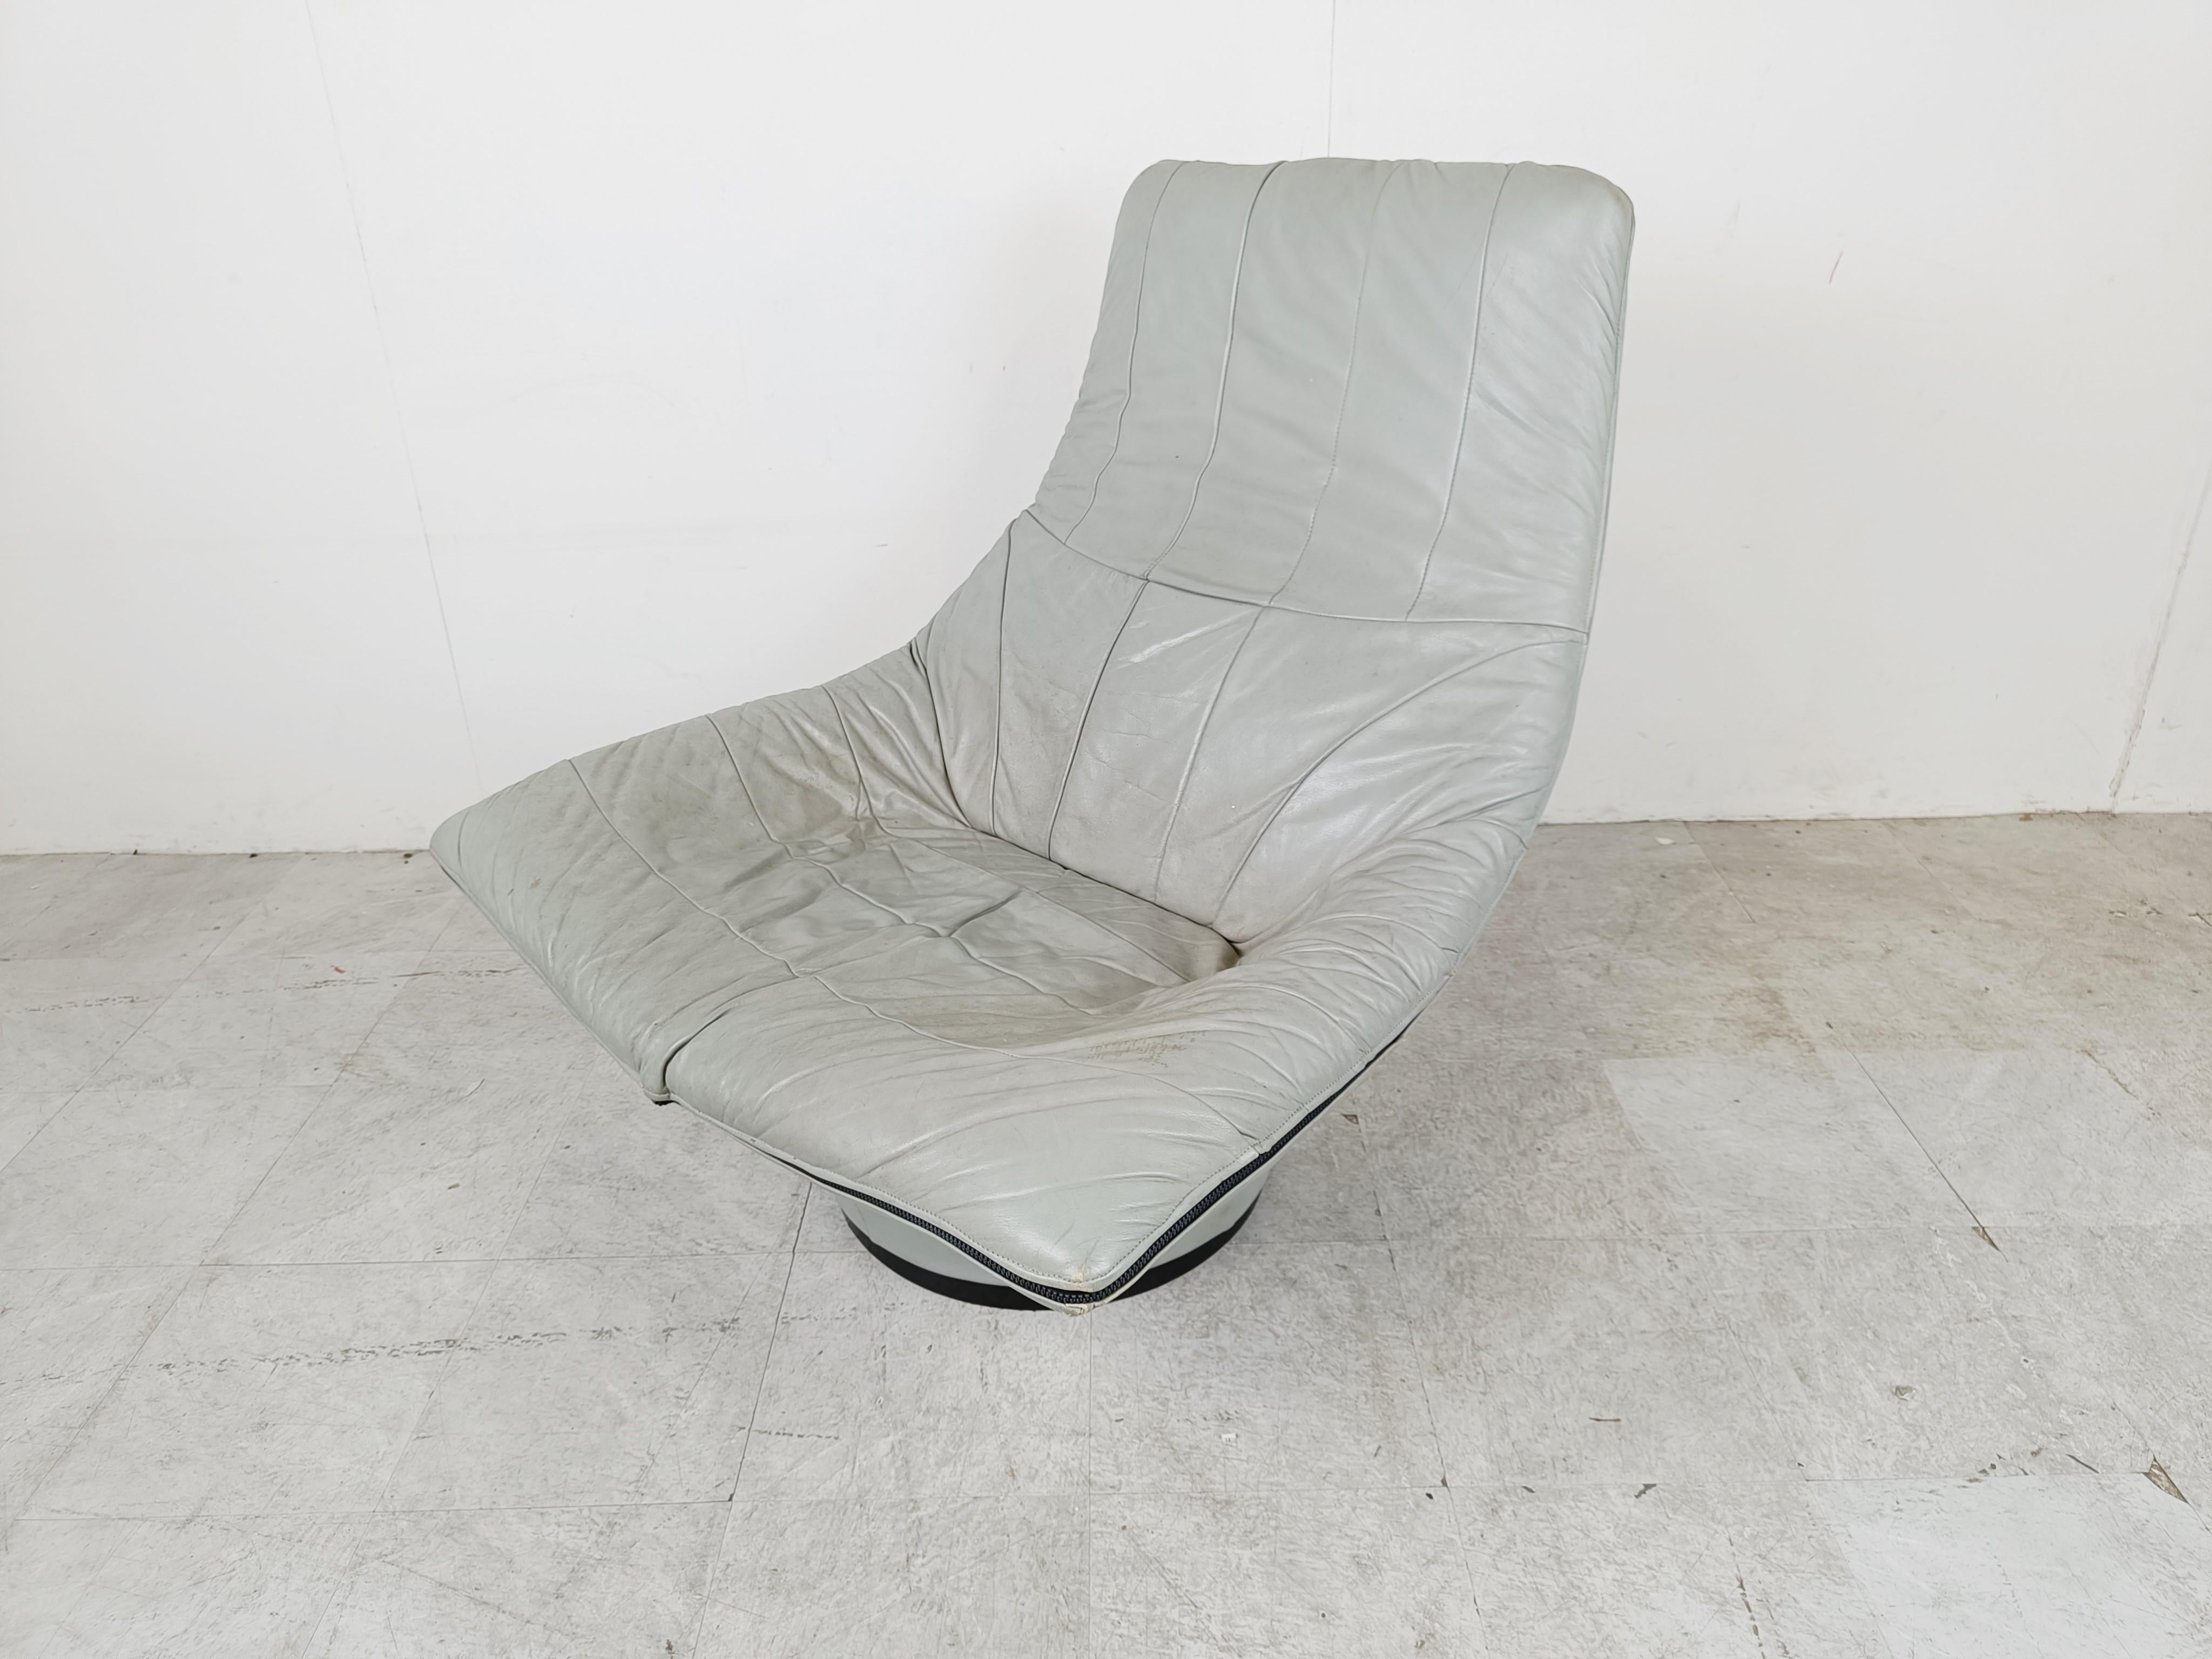 'Mantis' lounge chair in light grey leather designed by Gerard Van Den Berg for Montis.

The chair sits incredibly comfortable.

Smart and beautiful timeless design.

1970s - The Netherlands

Good condition with normal age related wear. No holes or